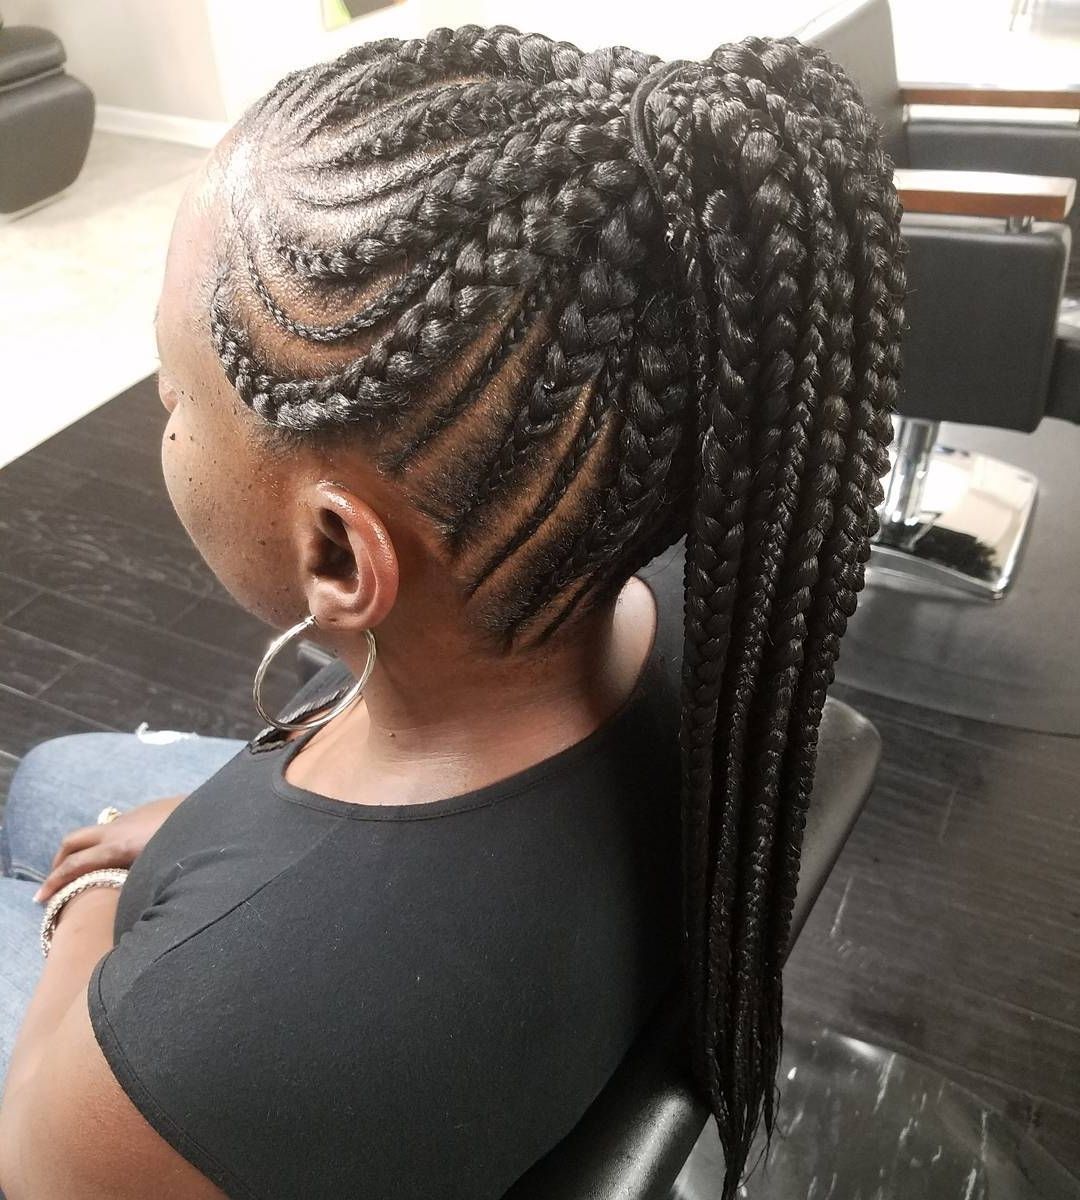 2018 Classy 2 In 1 Ponytail Braid Hairstyles Intended For 20 Gorgeous Ghana Braids For An Intricate Hairdo In  (View 10 of 20)